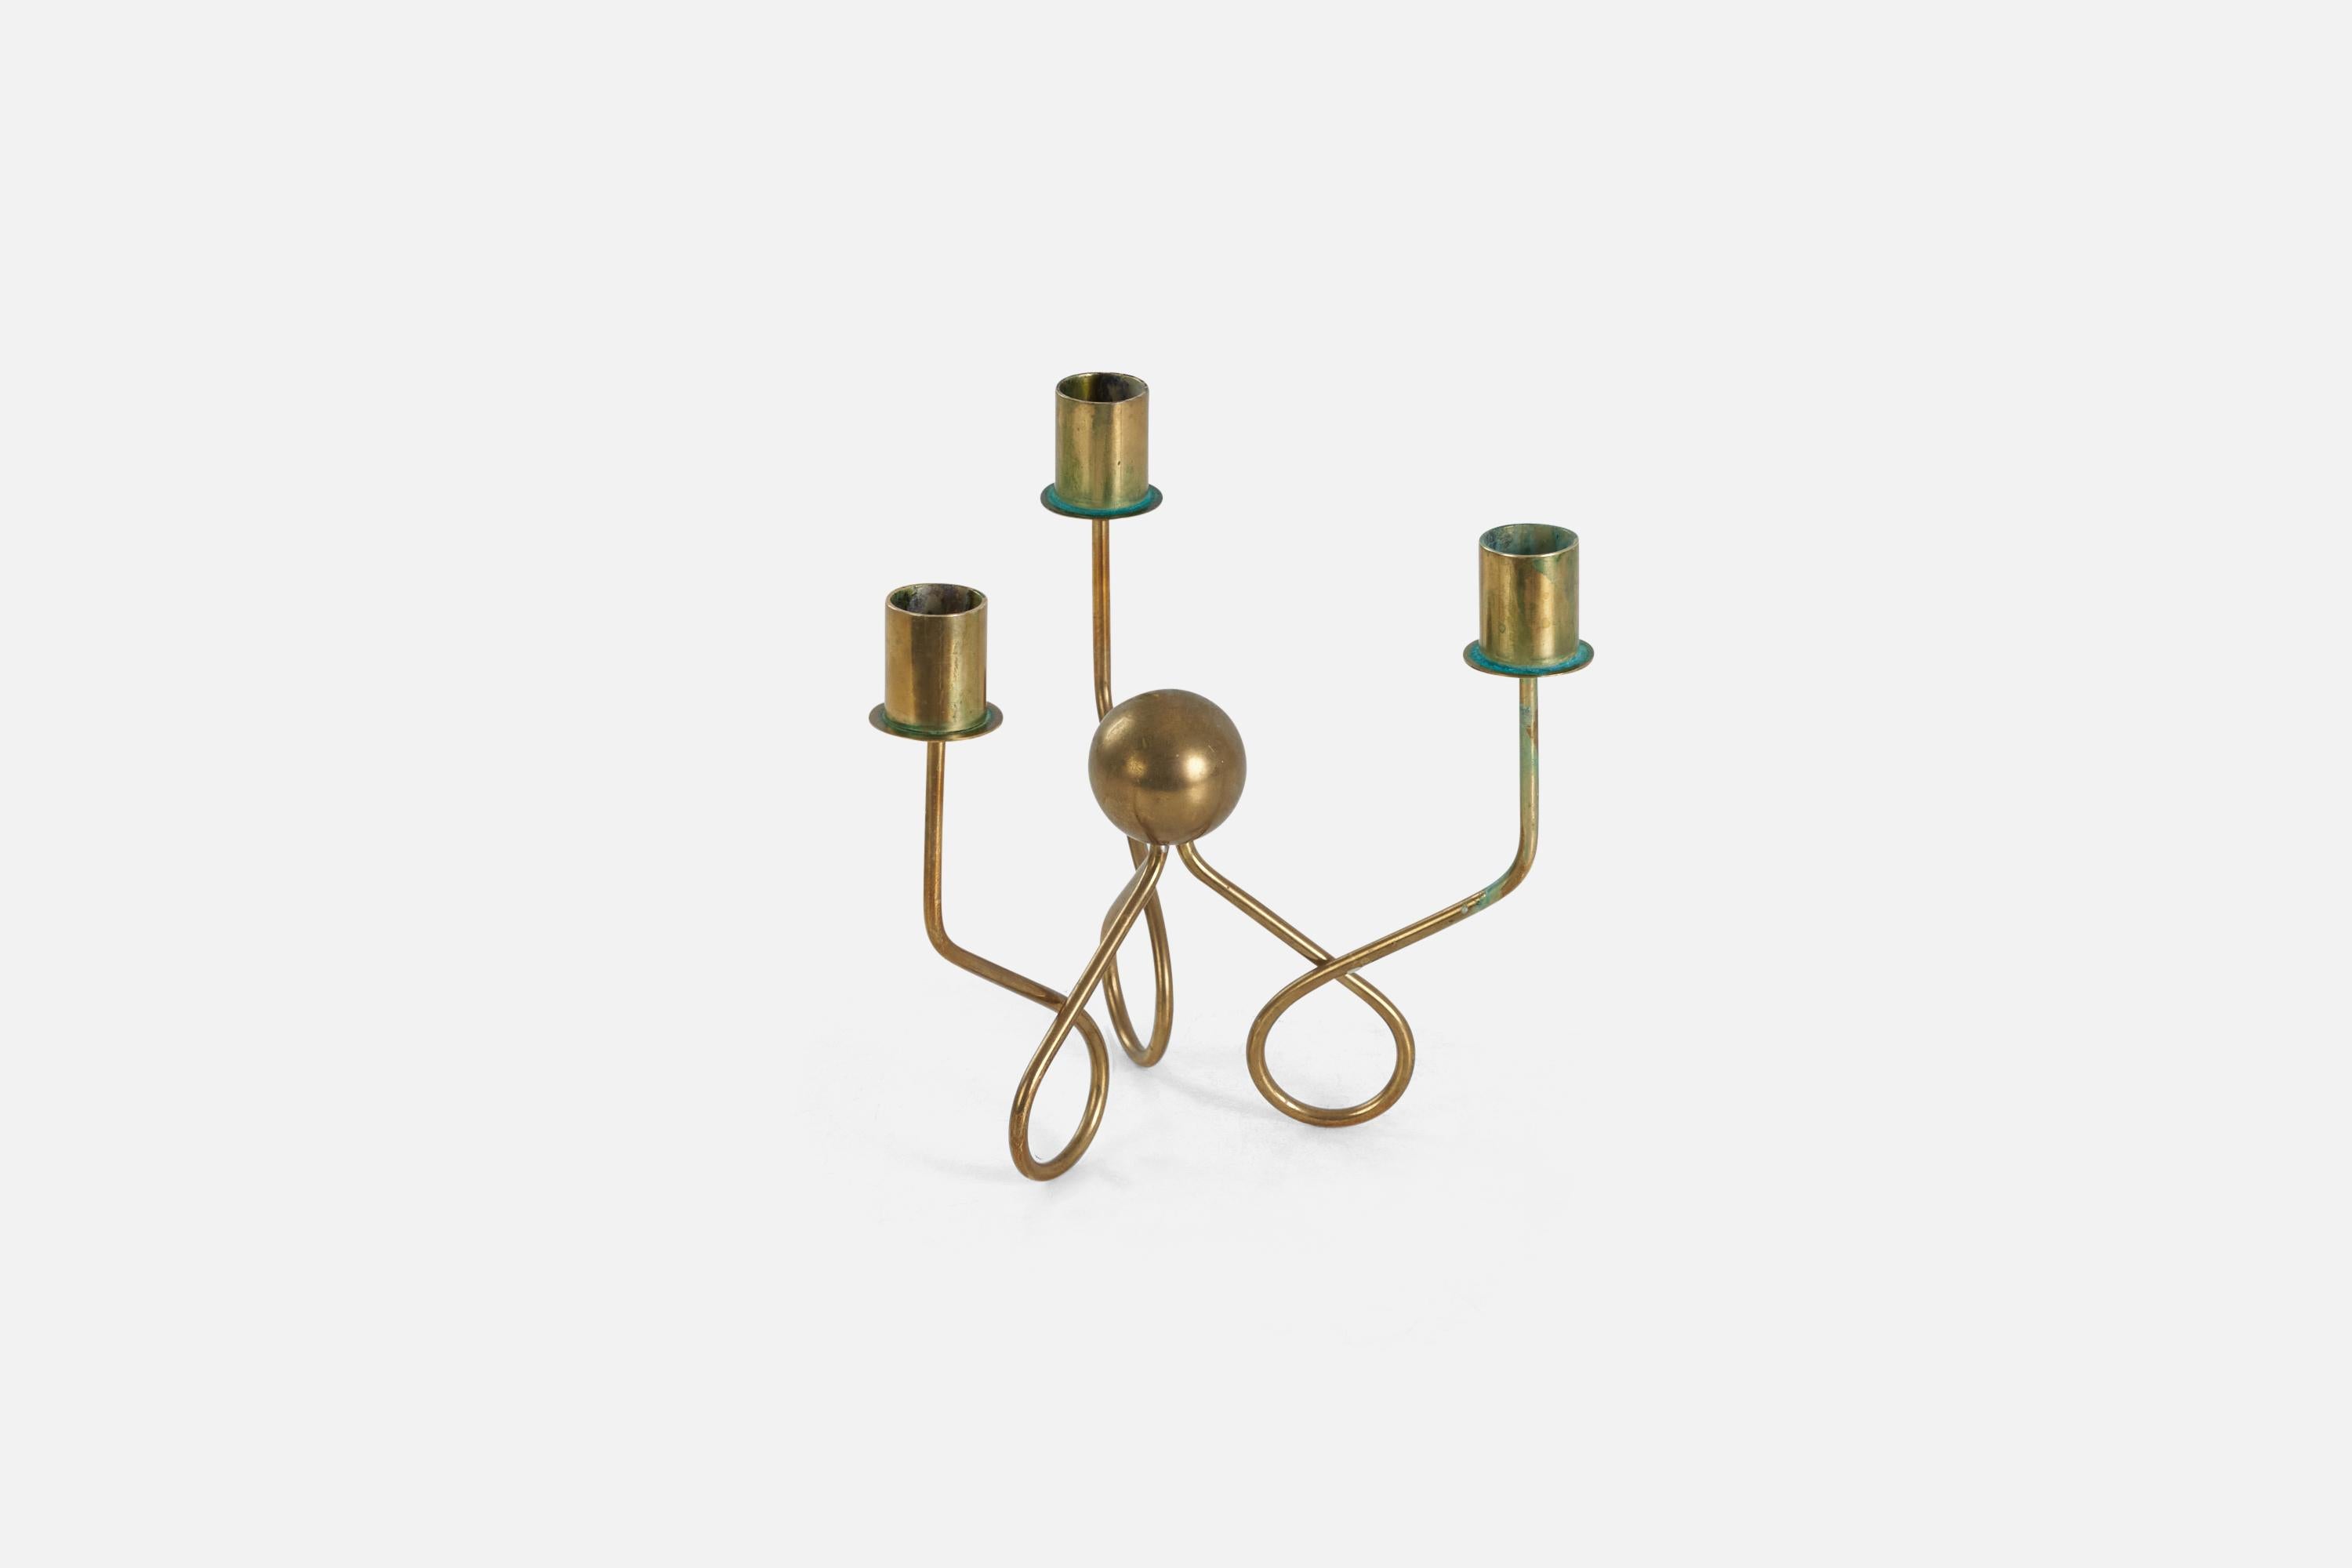 A brass candle holder designed and produced in Sweden, 1940s.